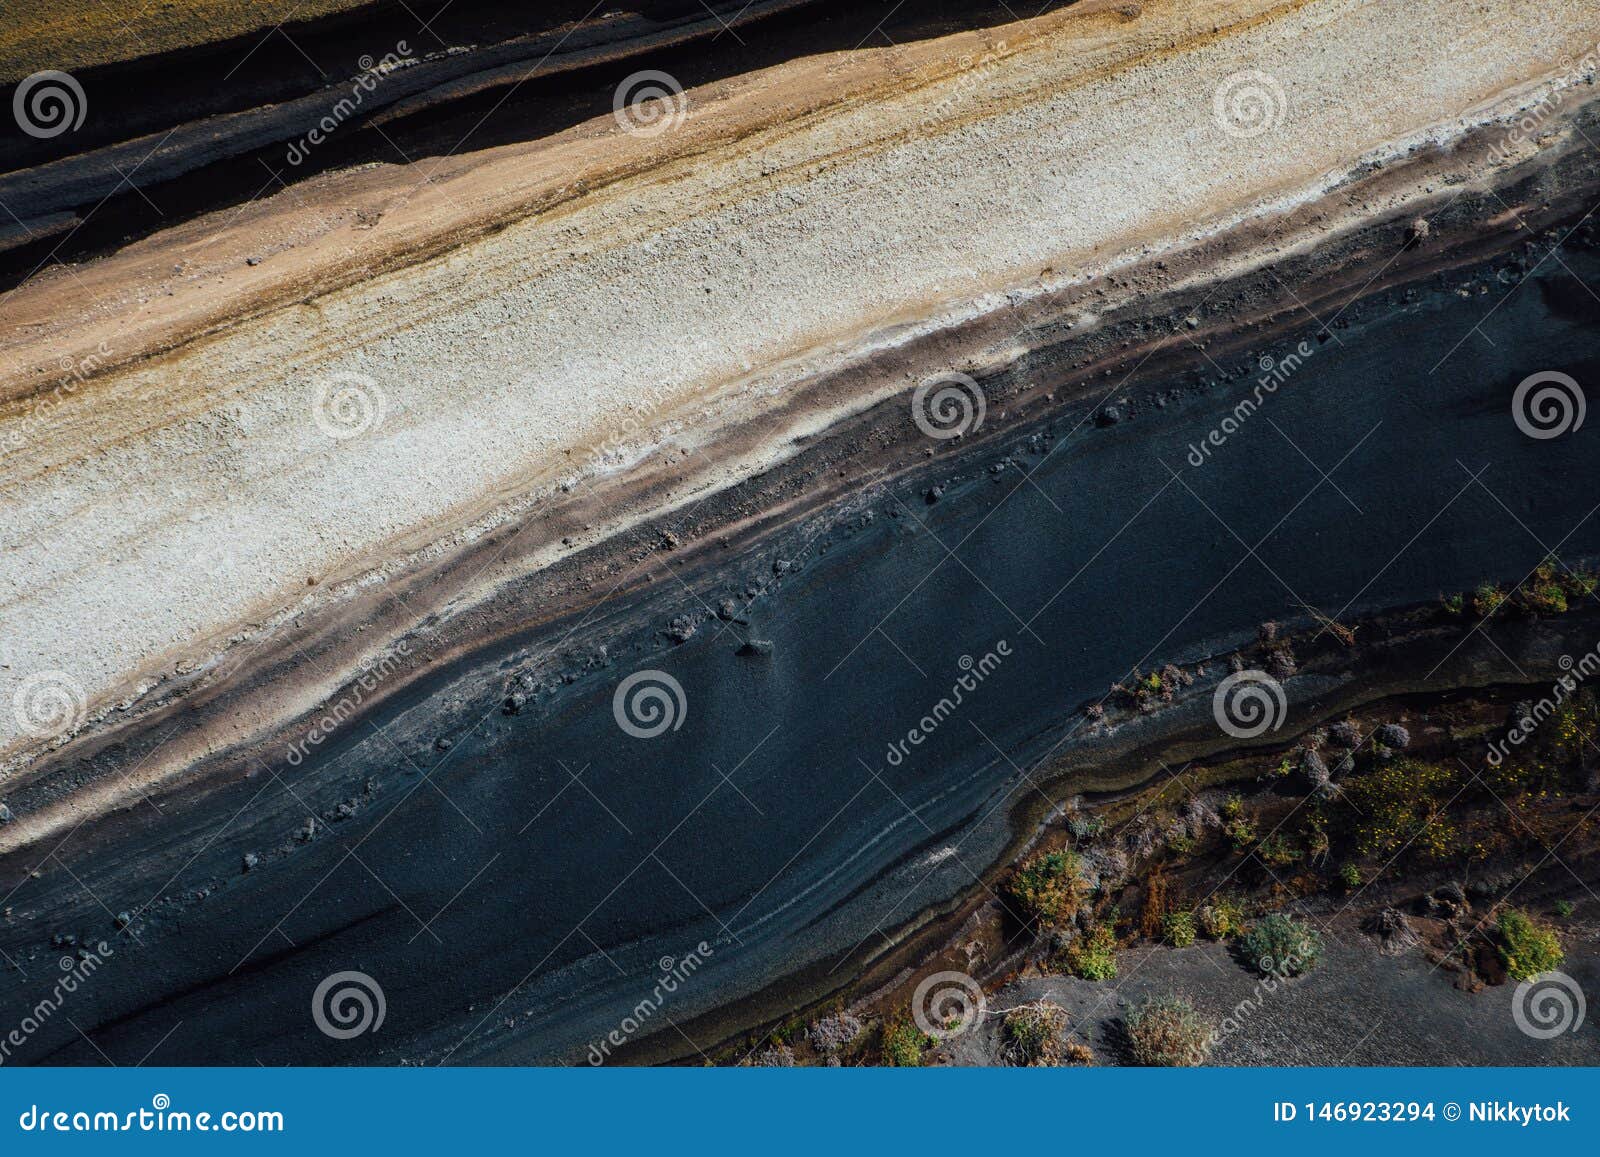 stratum of earth crust in cross-section, abstract background